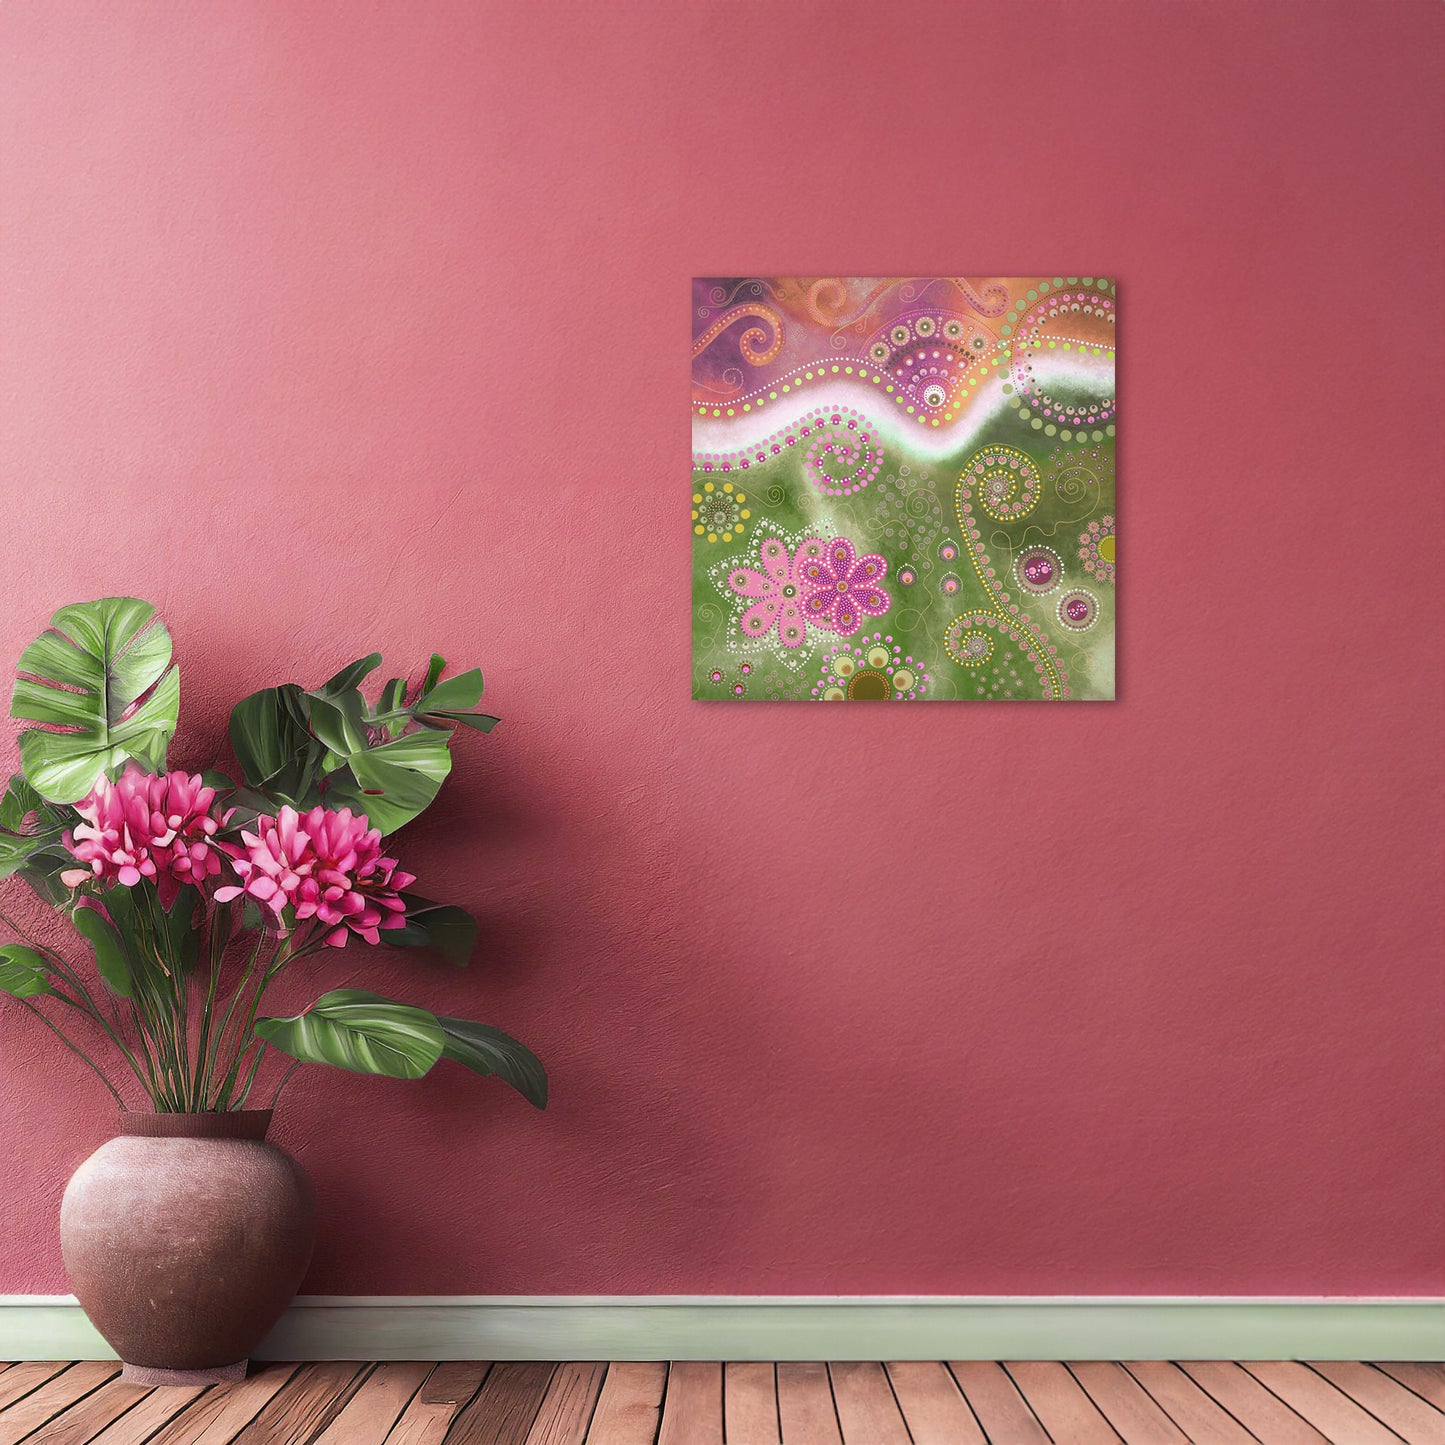 "The Happiness inside" - Pastel Dream - by Fanny Fay Engström